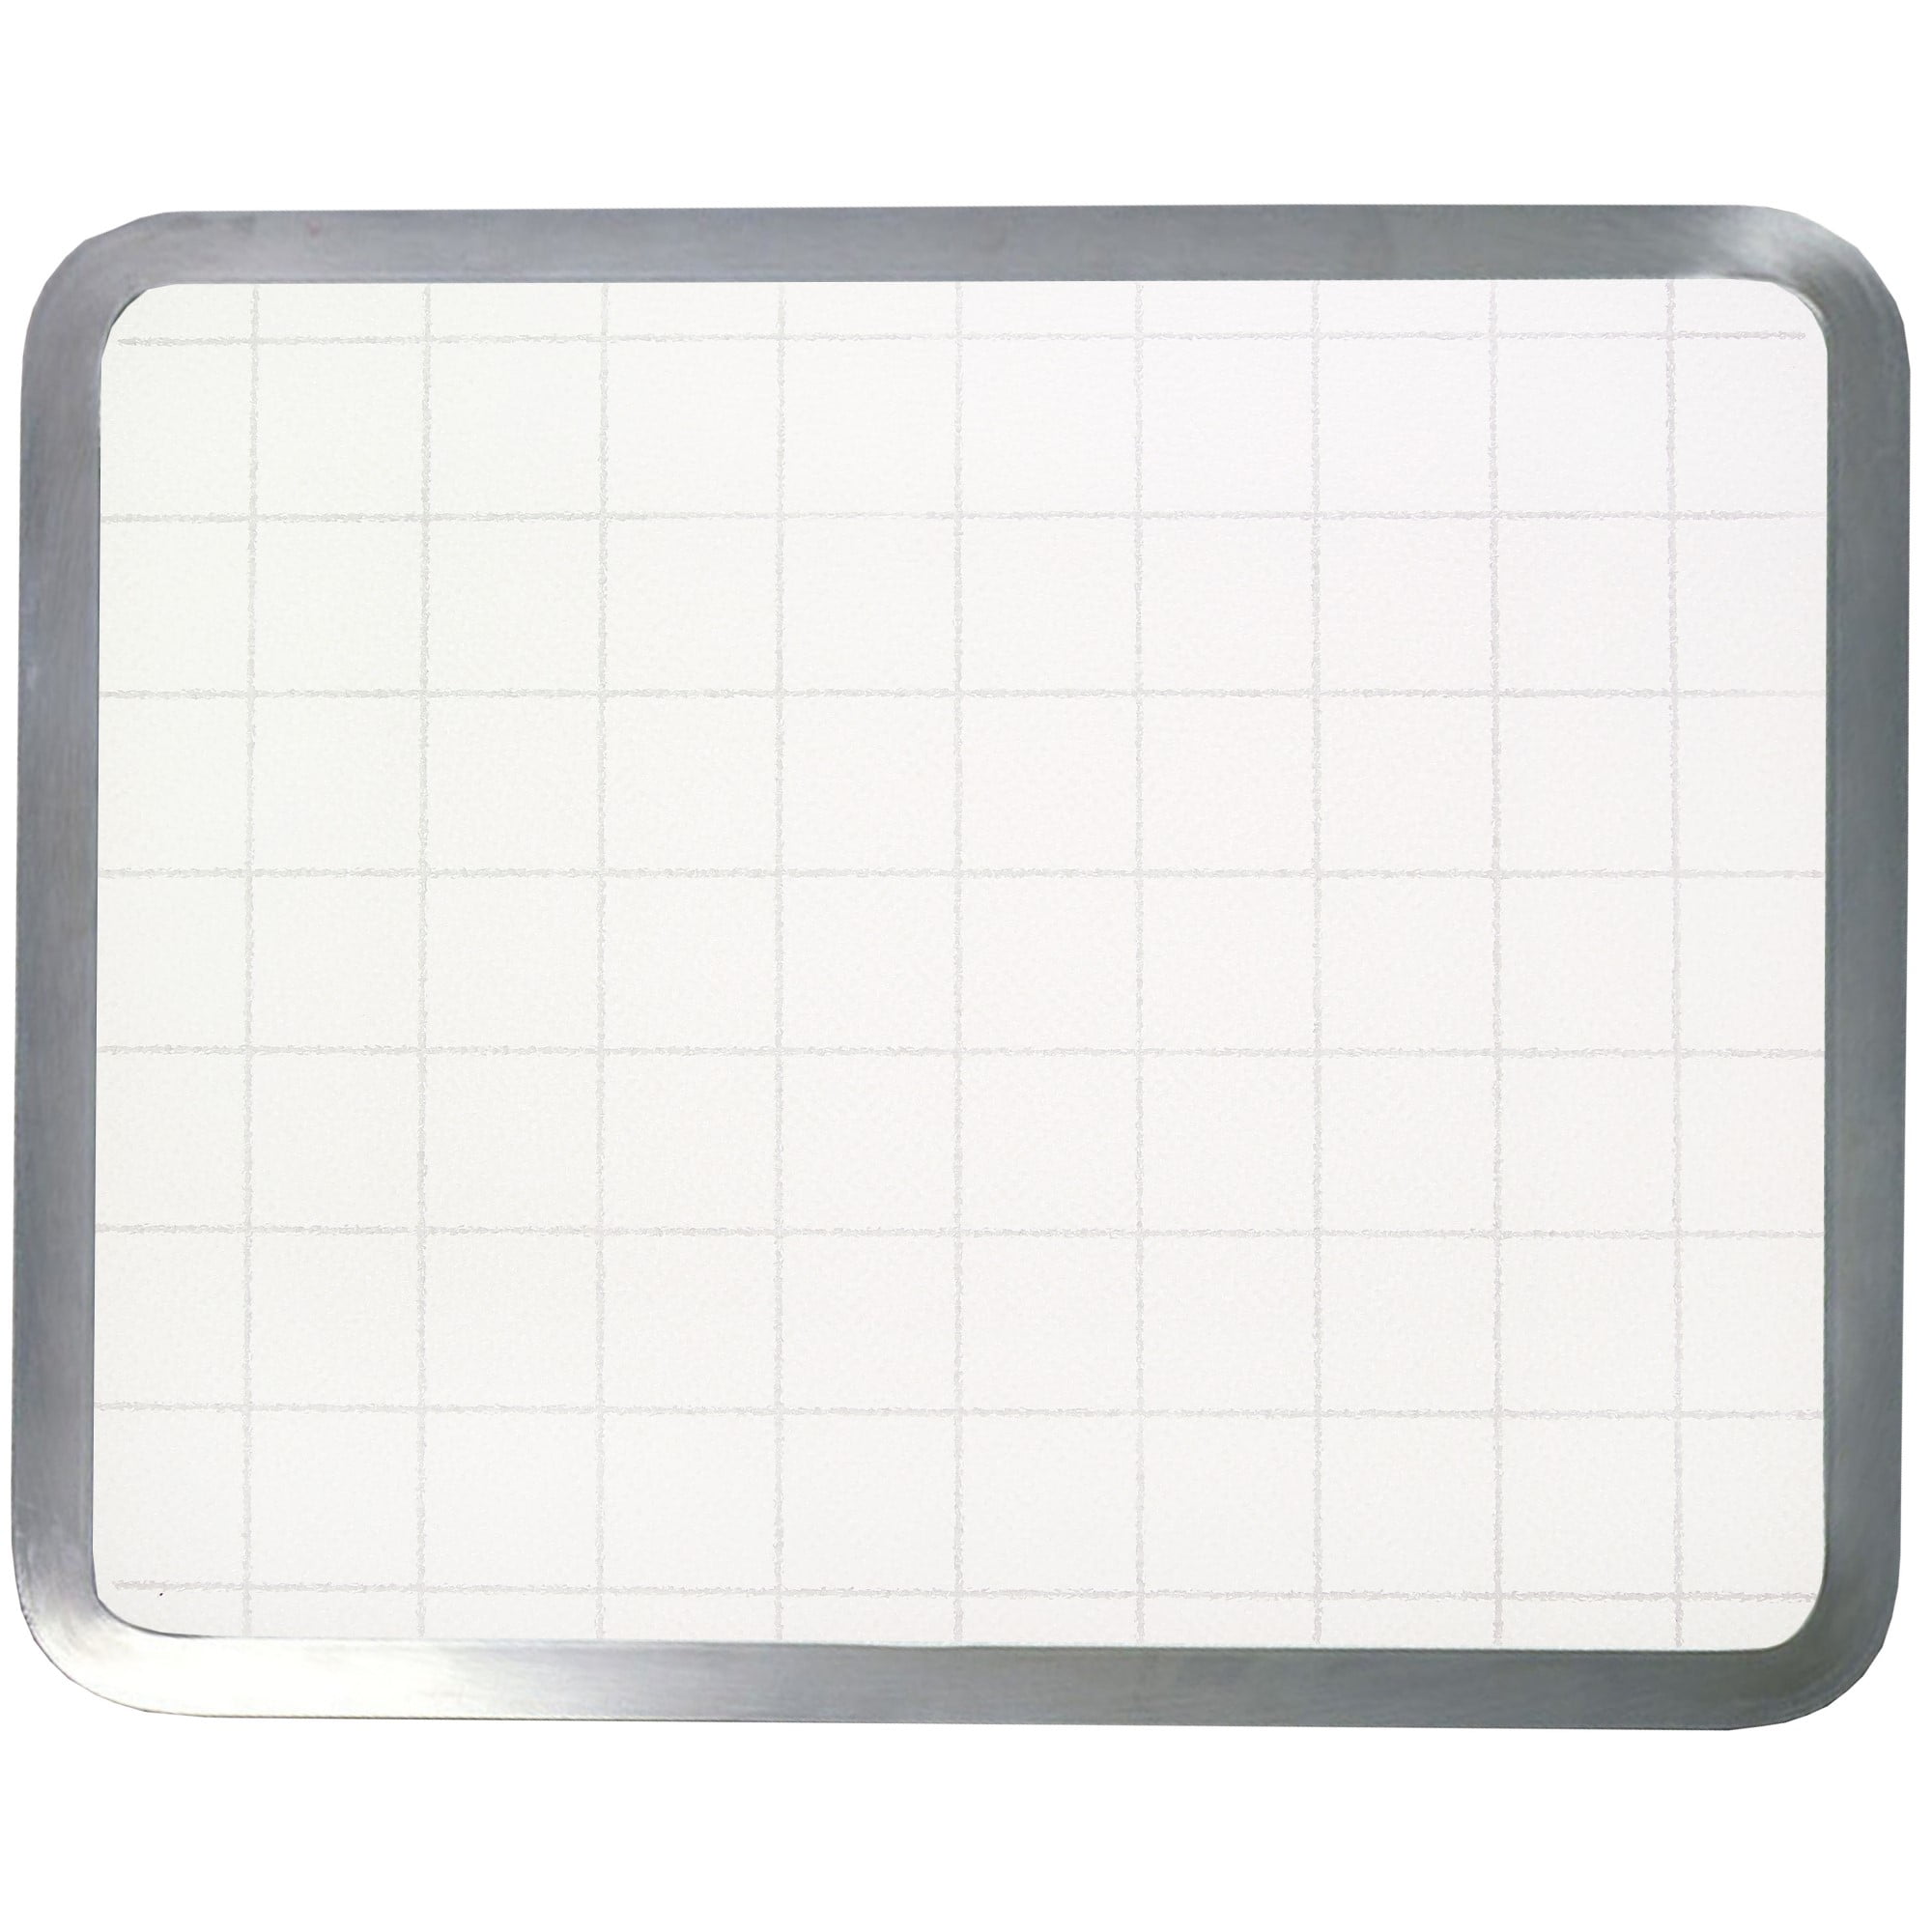 82016GB Vance 20 X 16 Gray Border Surface Saver Tempered Glass Cutting Board 